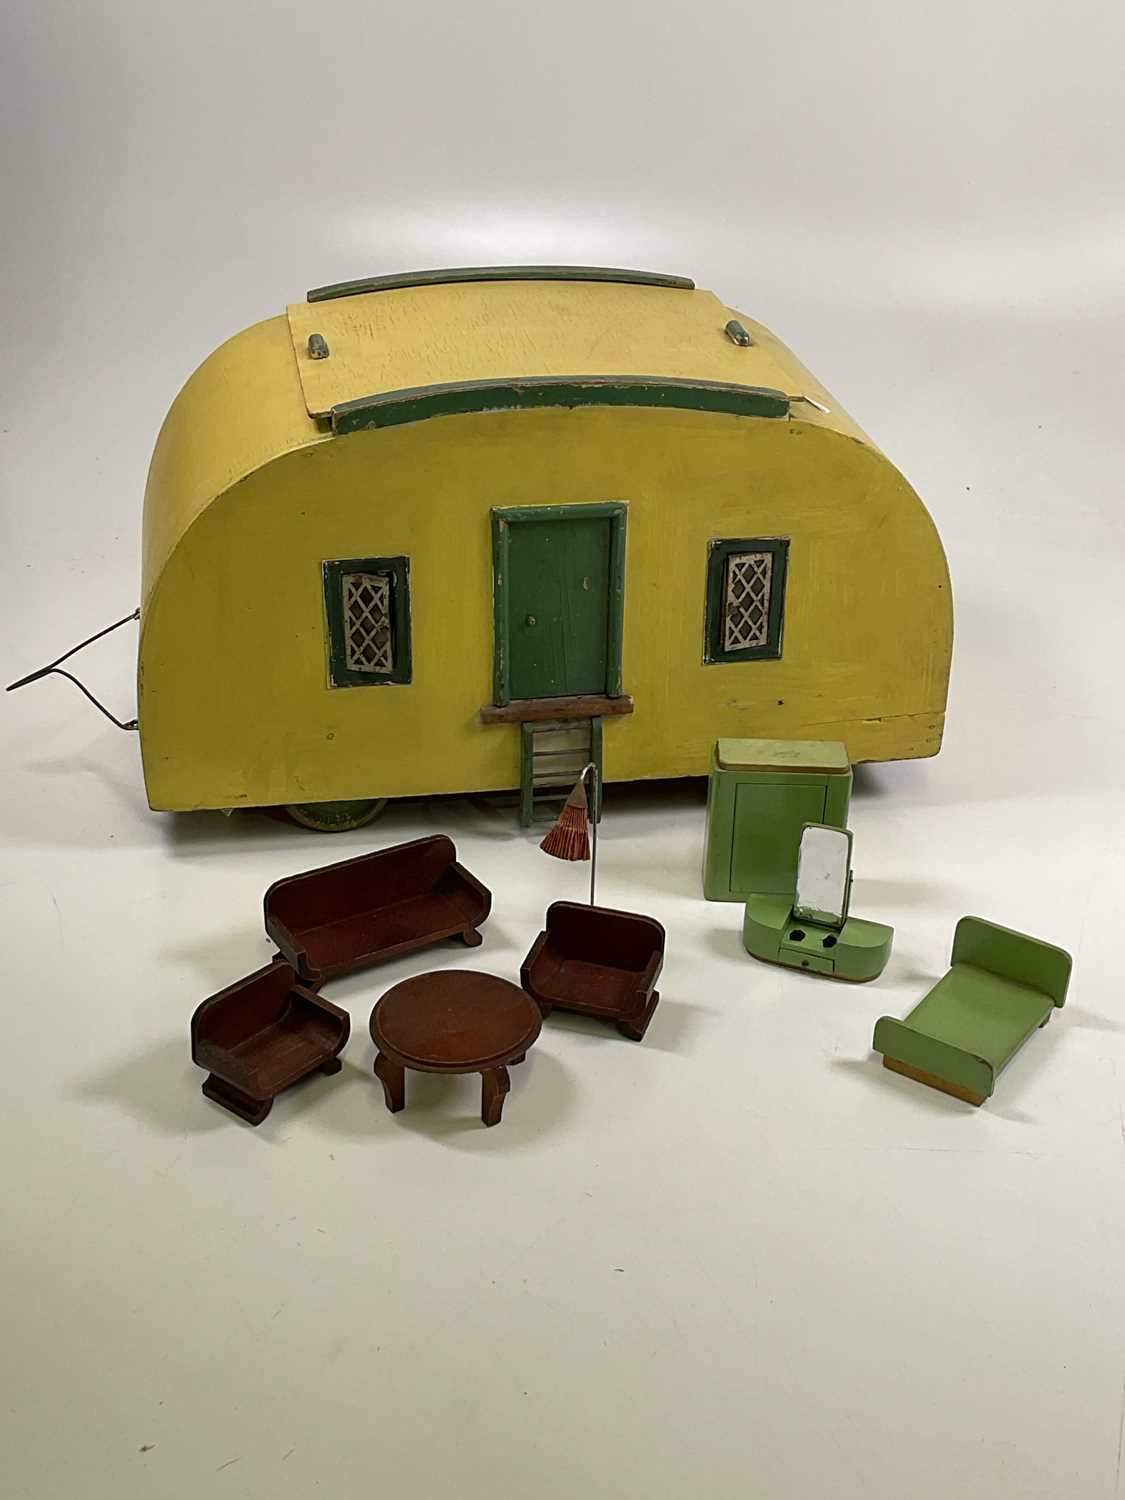 ATTRIBUTED TO TRI-ANG; a cream and green 1950's caravan with two small opening windows on one side - Image 6 of 6